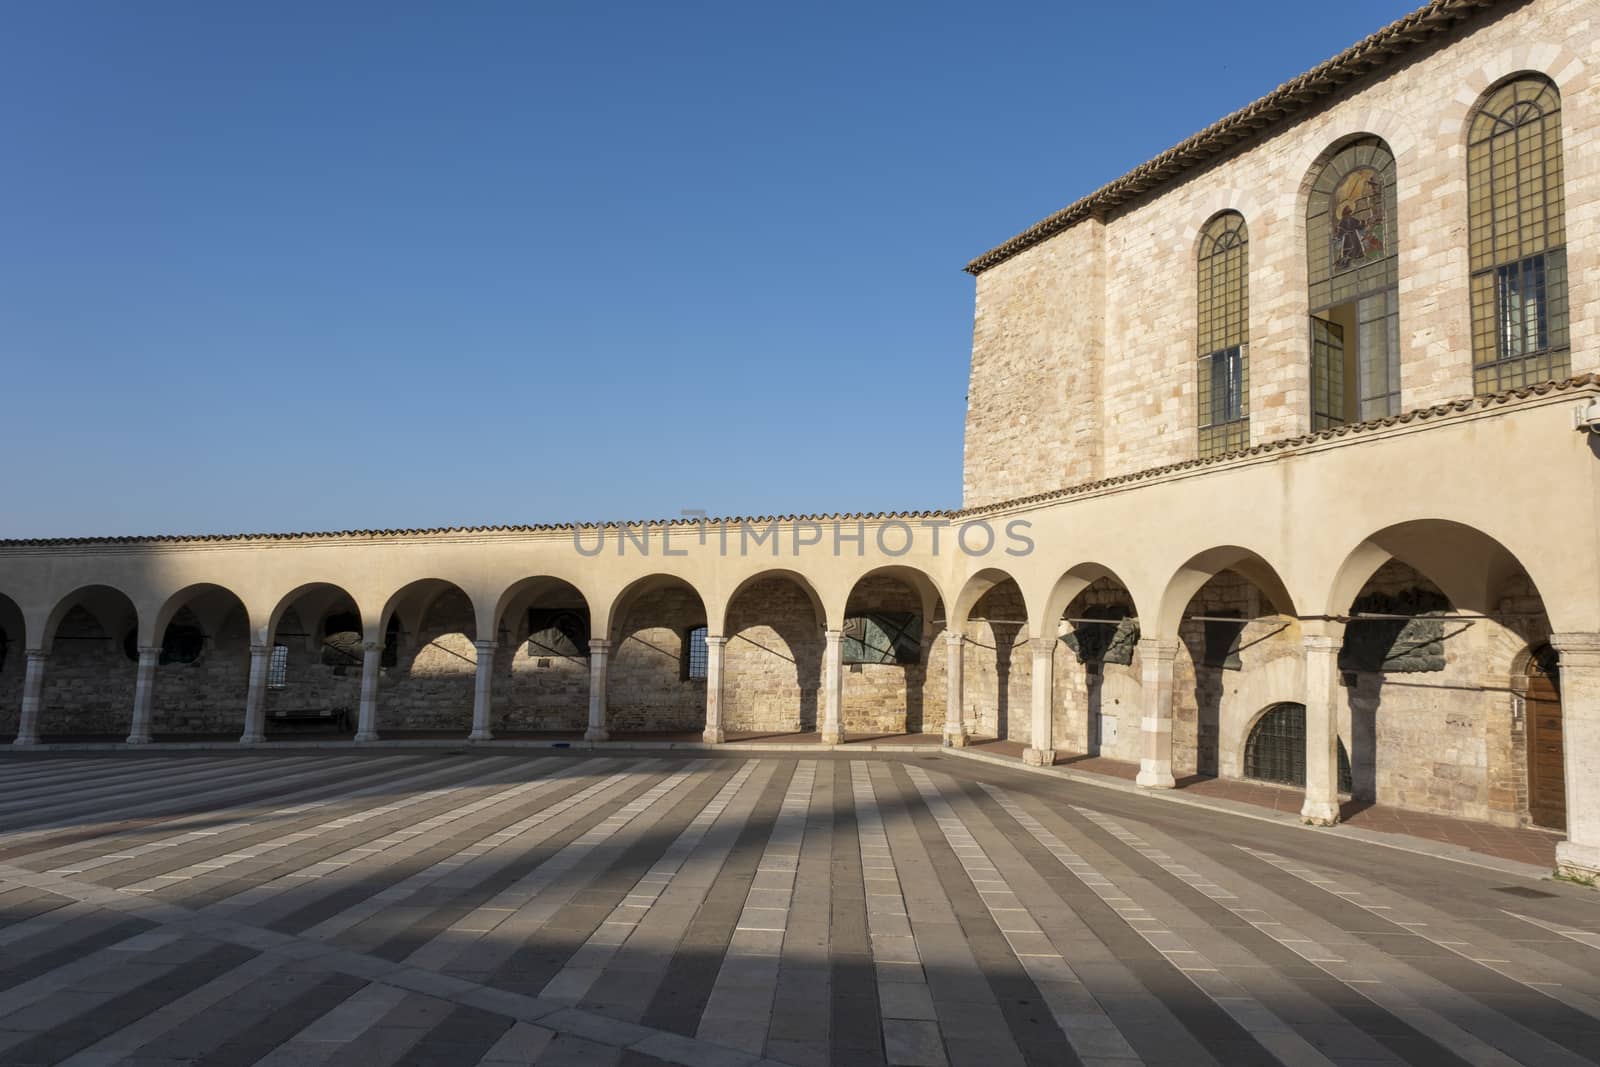 Assisi external of St. Francis basilica, one of the most important Italian religious sites.